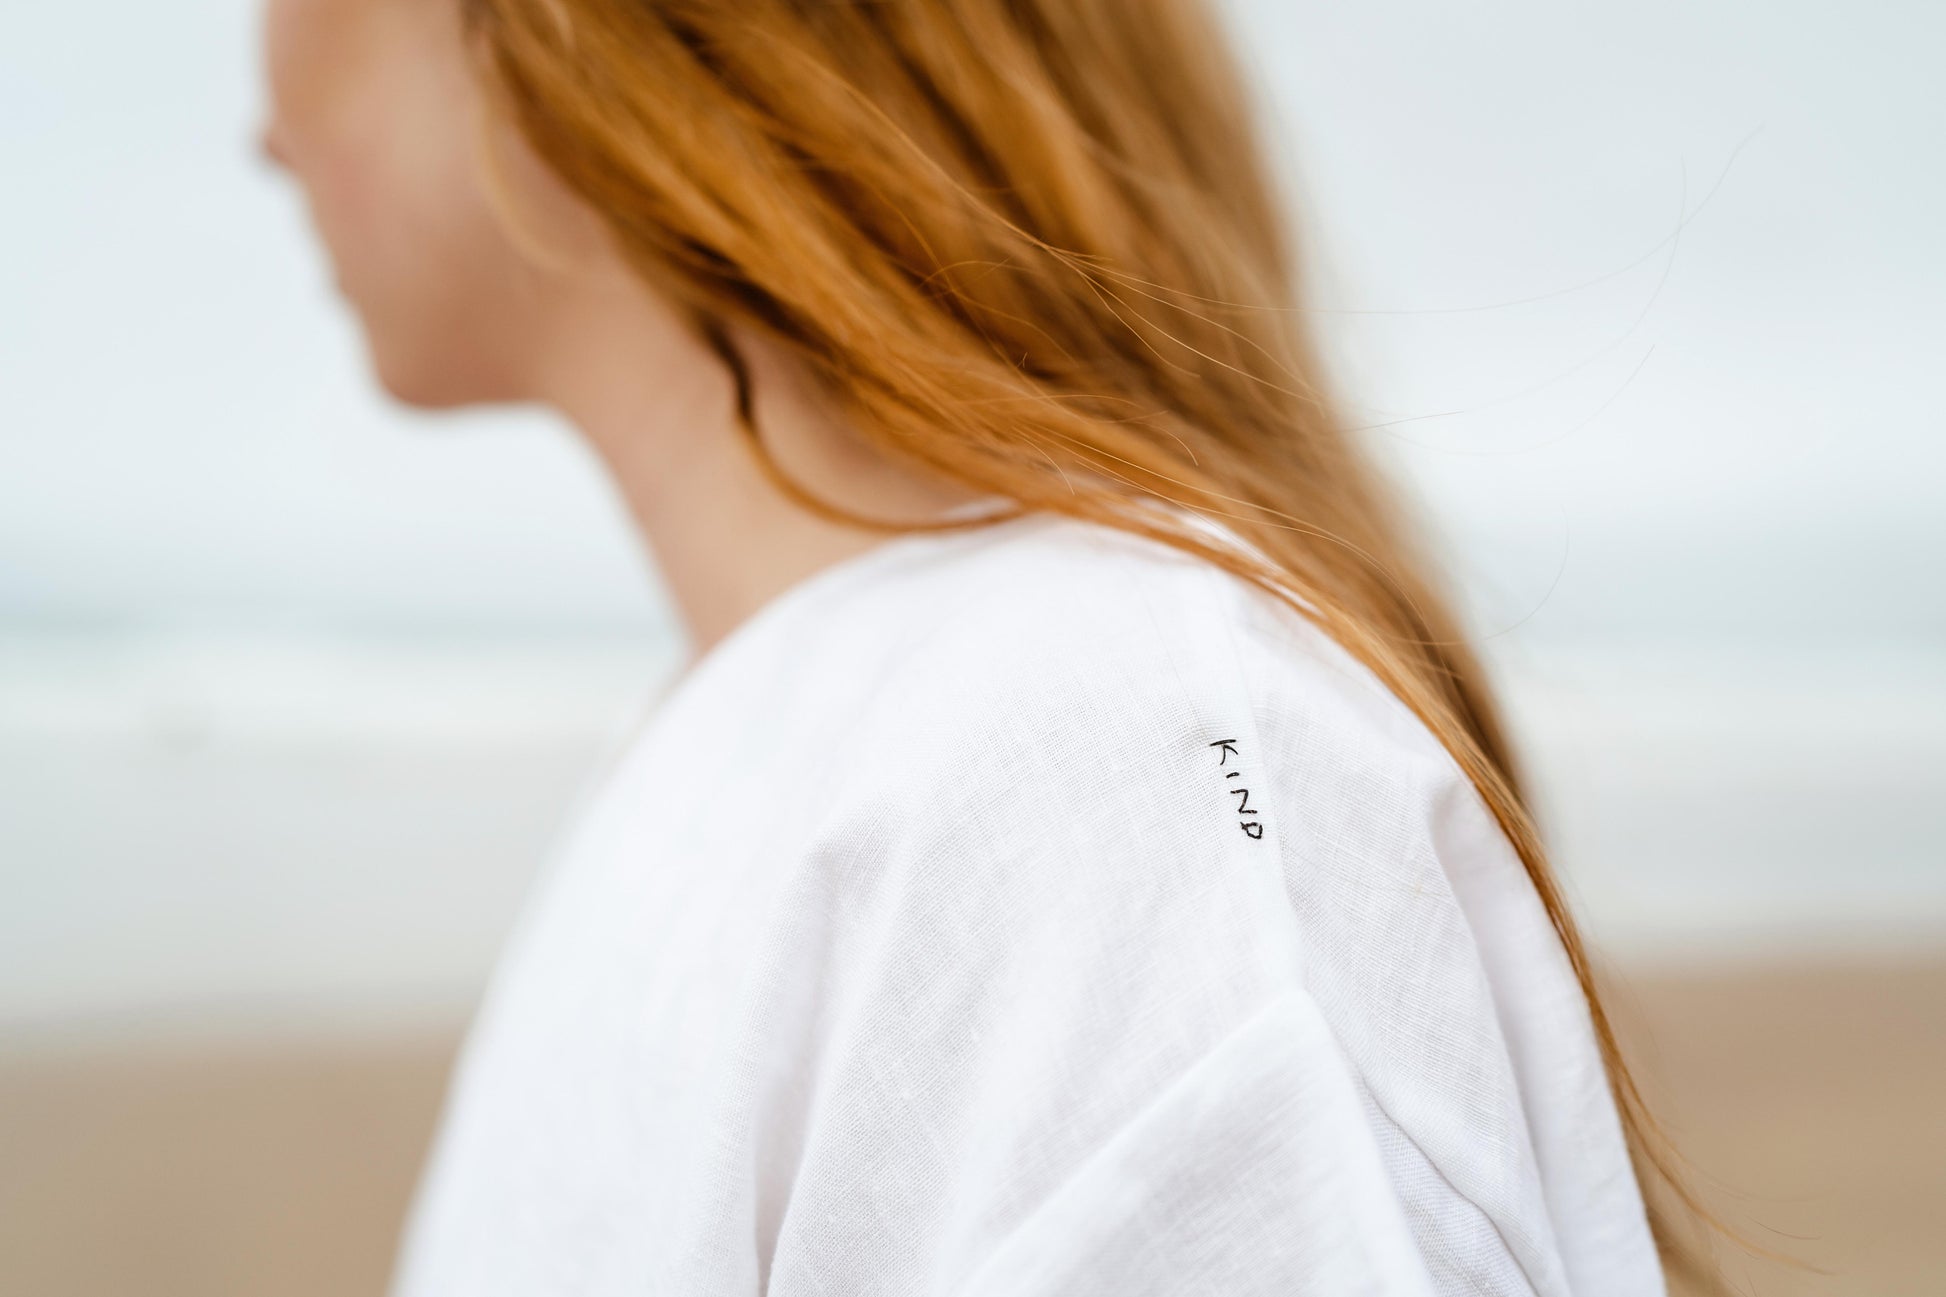 KIND TEE | WHITE | It's cool to be Kind Kind, the first four letters of our brand name - and what we hope to embody! The Kind Tee is a classic staple. Wear with 'V' at front or at the back for a higher neck line- a perfect layering piece. The tee features